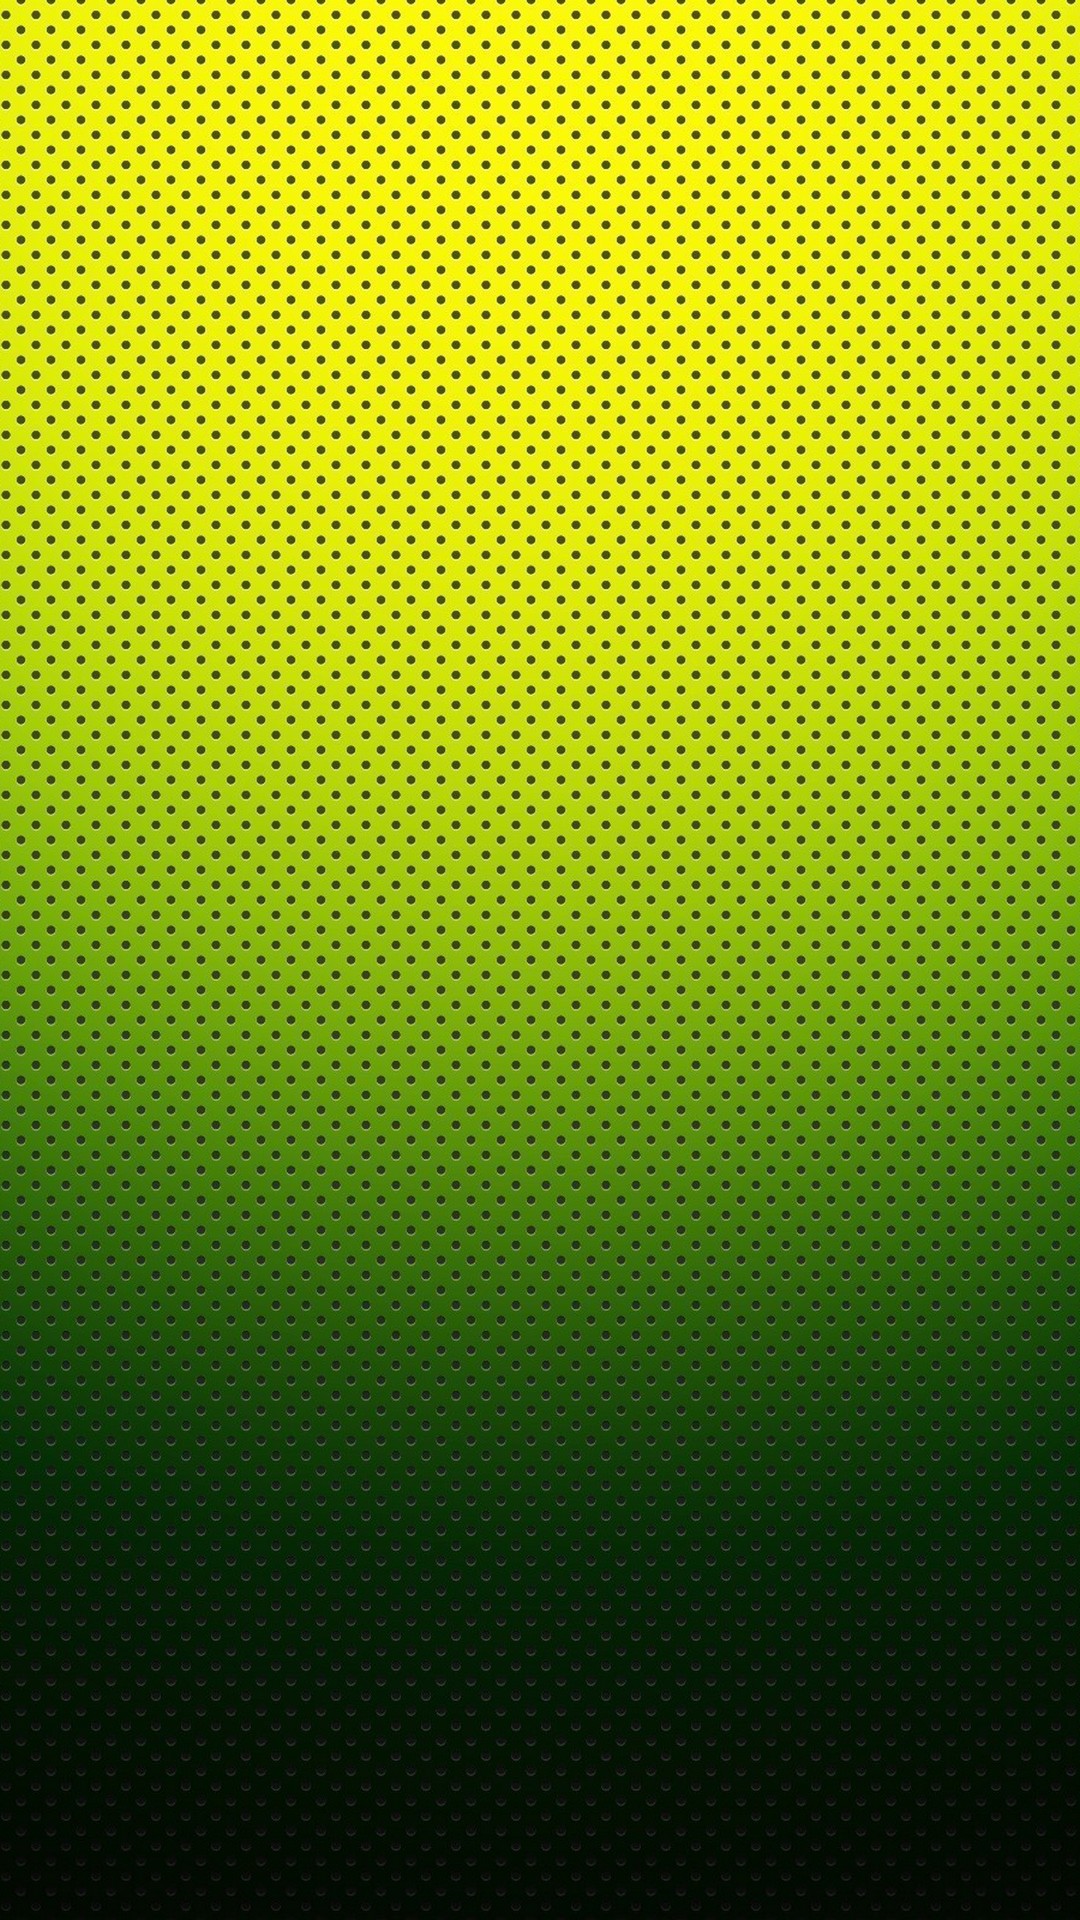 Lime Green Wallpaper For Android with image resolution 1080x1920 pixel. You can make this wallpaper for your Android backgrounds, Tablet, Smartphones Screensavers and Mobile Phone Lock Screen